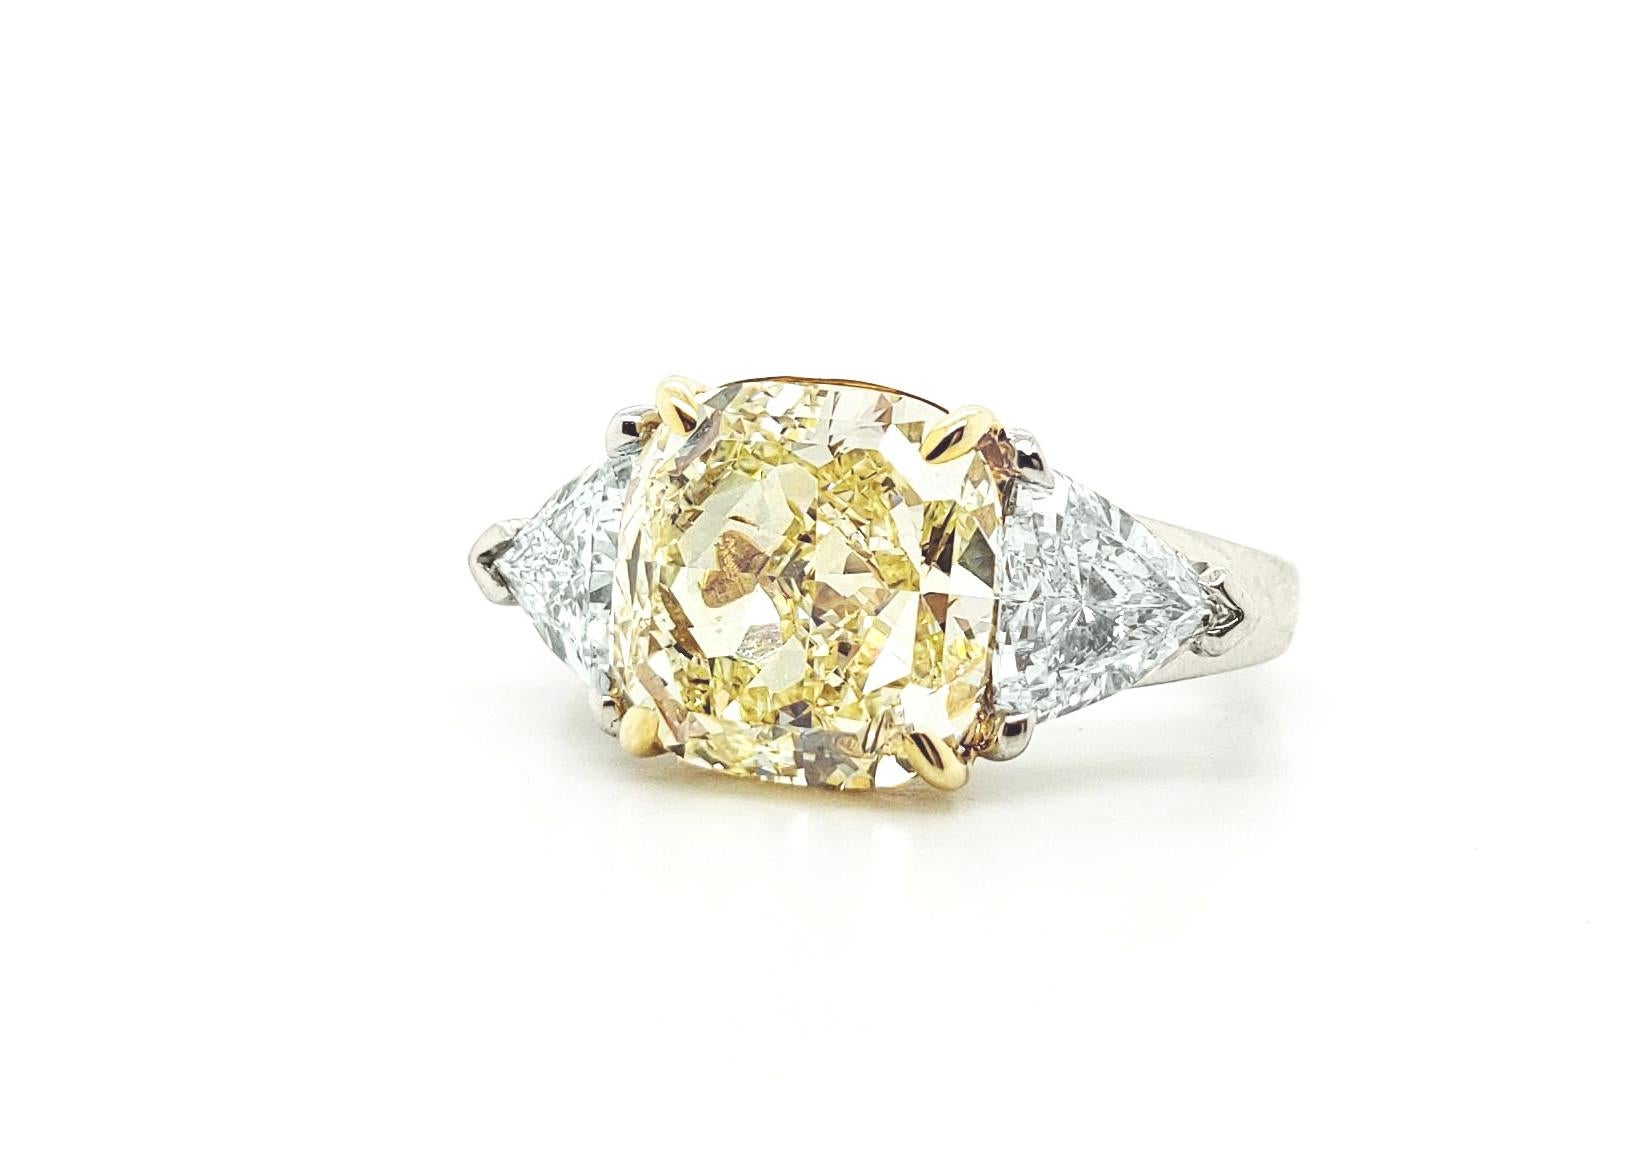 From SCARSELLI, this gorgeously cut 5.00 Fancy Yellow Cushion diamond ring is set with a pair of white side trilliant diamonds.  (2 = 1.55 carats) H color VS clarity.  This ring may be sized or the center diamond re-designed with Scarselli to suit